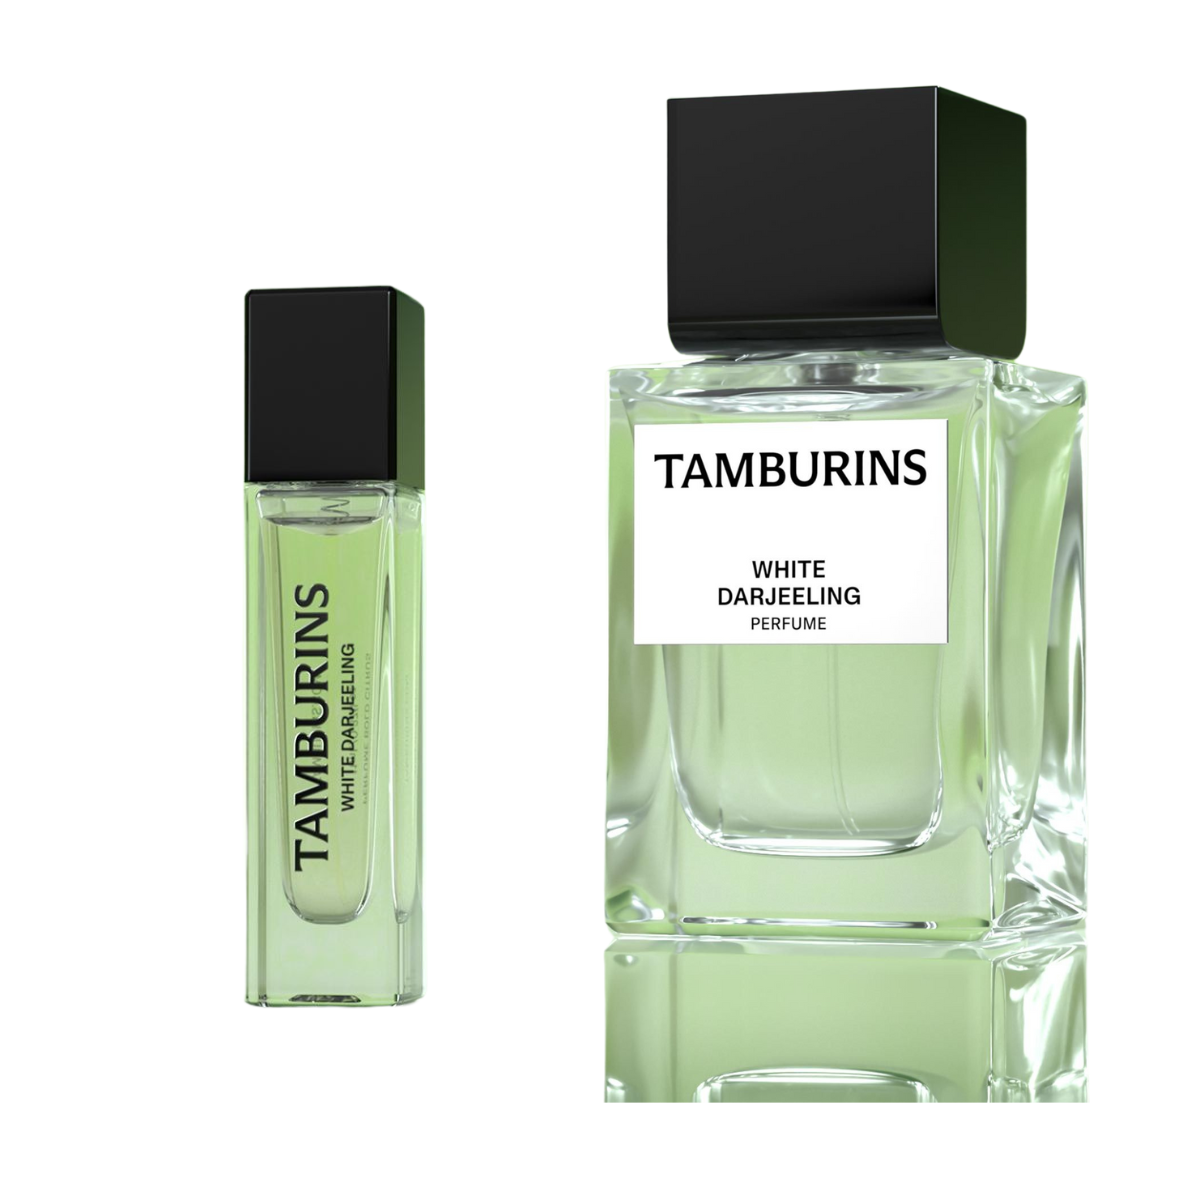 a bottle of tamburins perfume on a white background